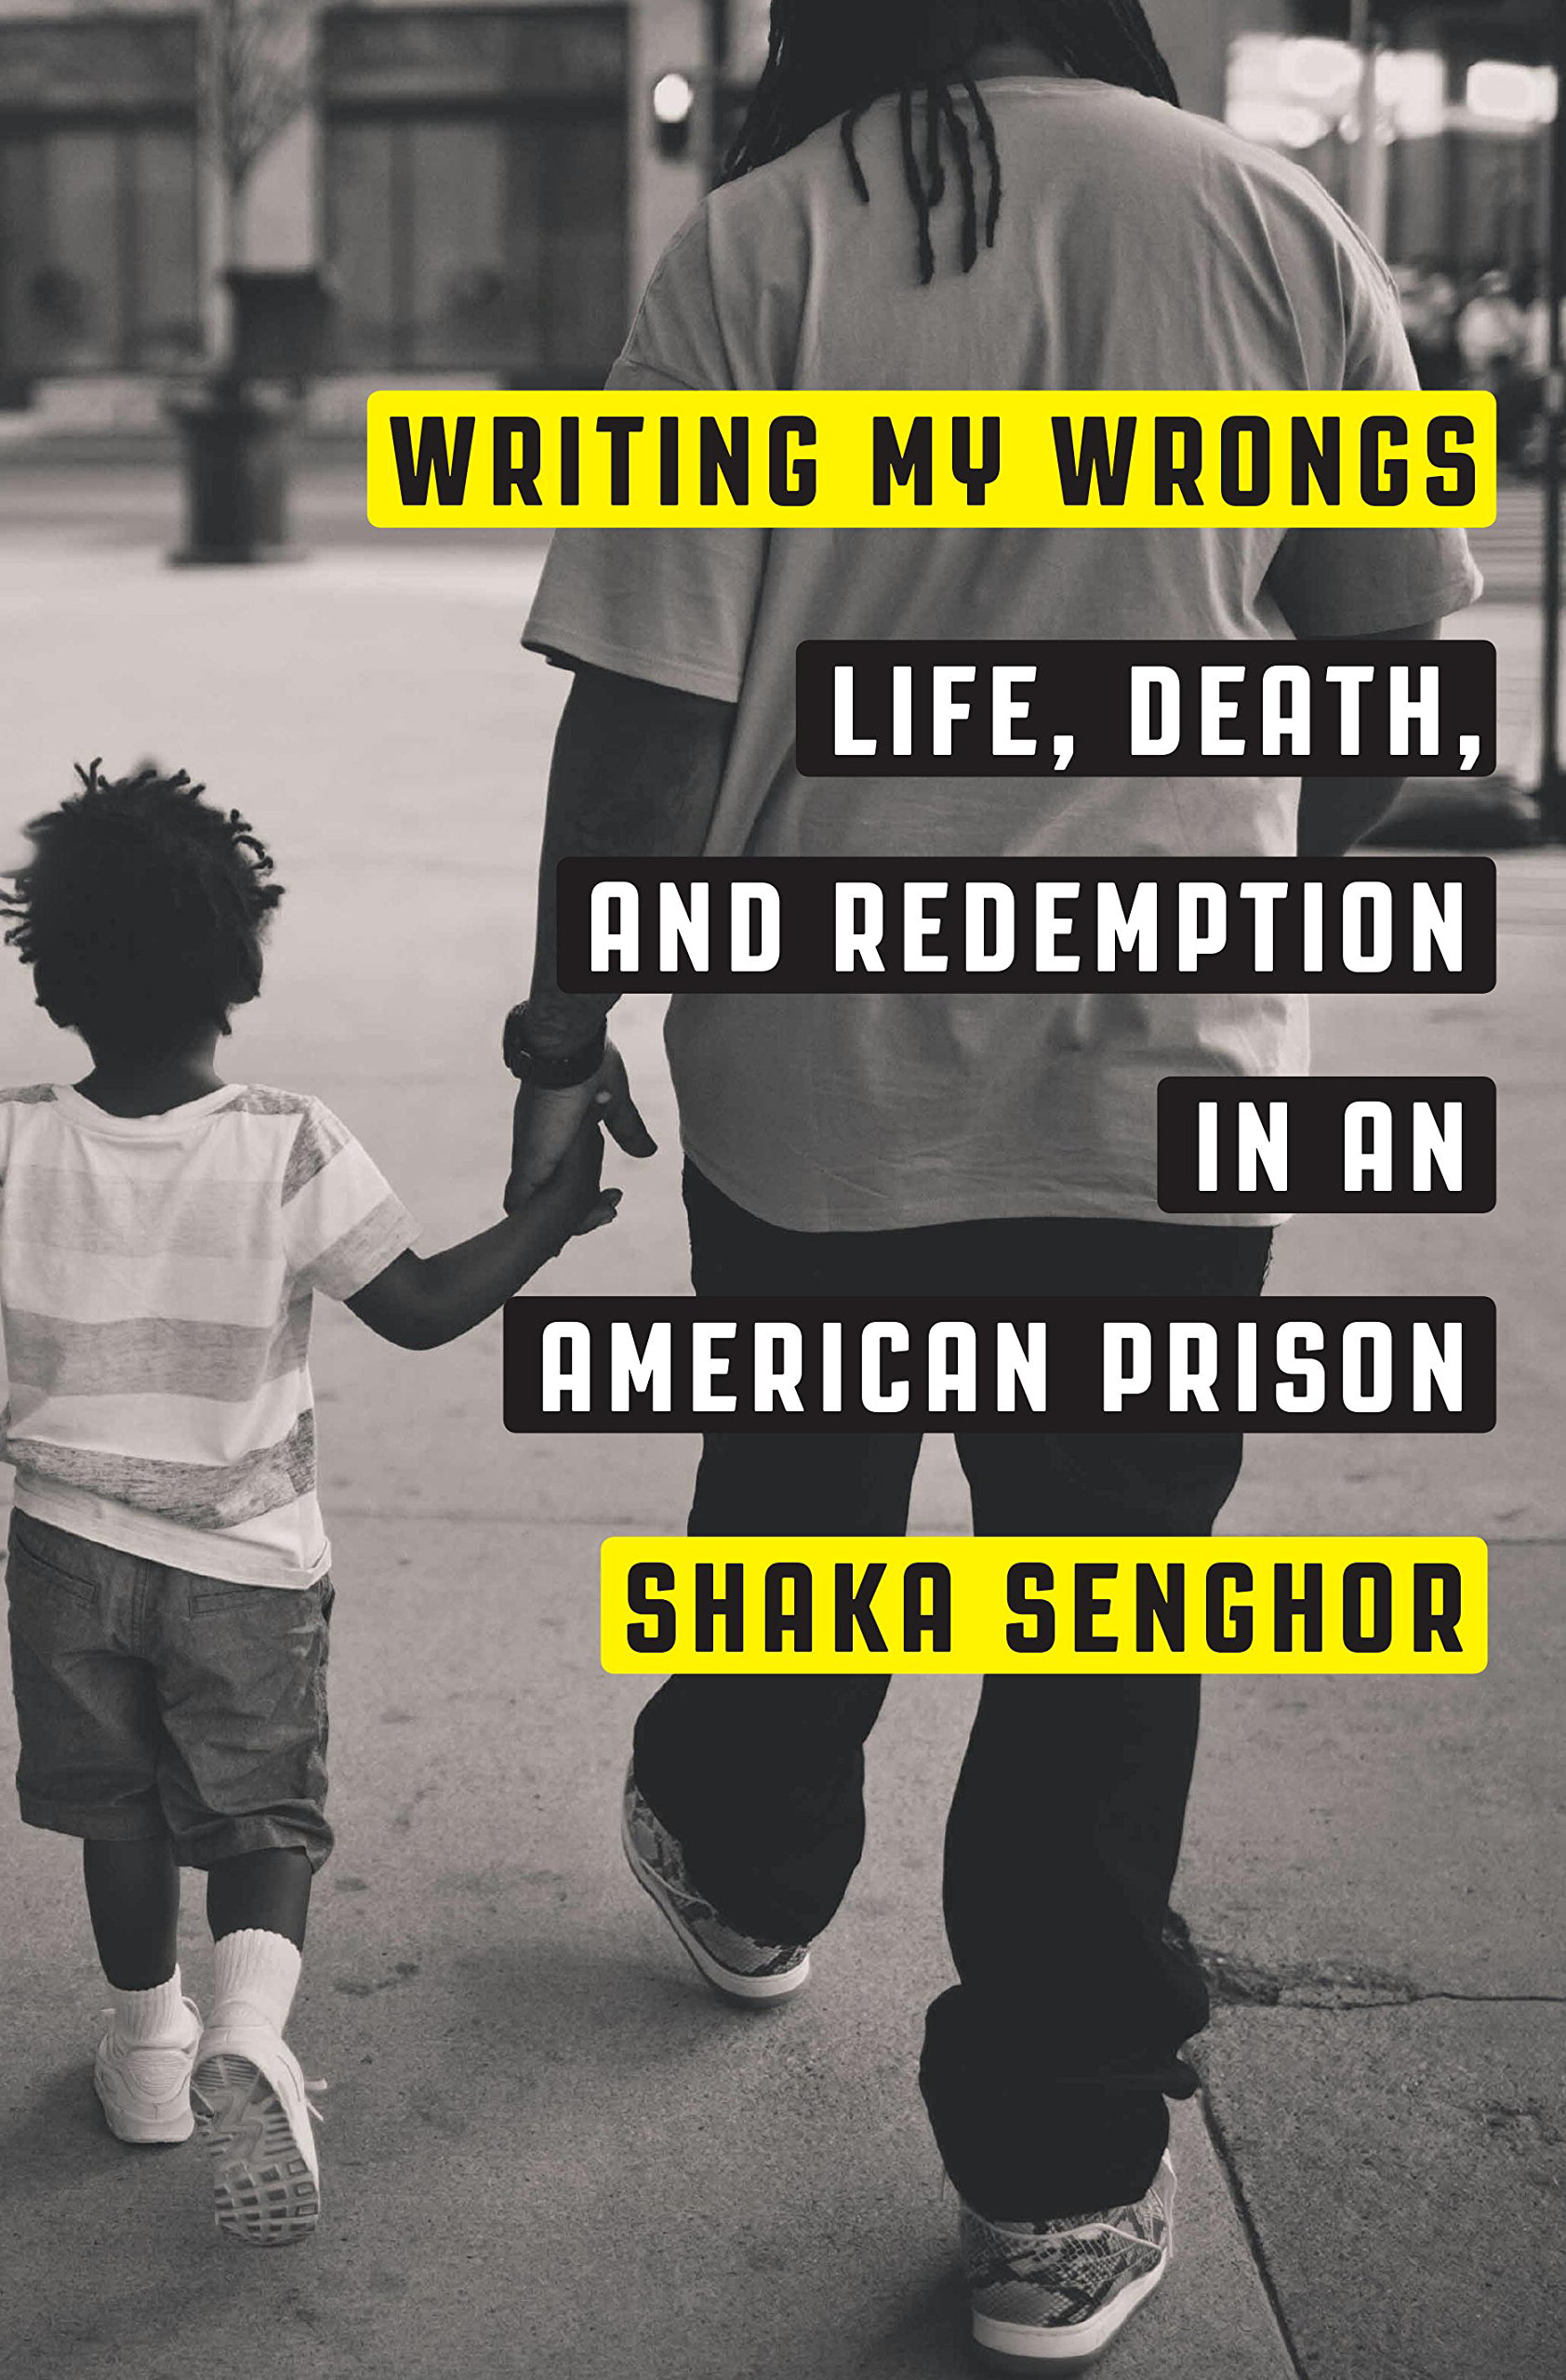 shaka-senghor-life-death-and-redemption-in-an-american-prison